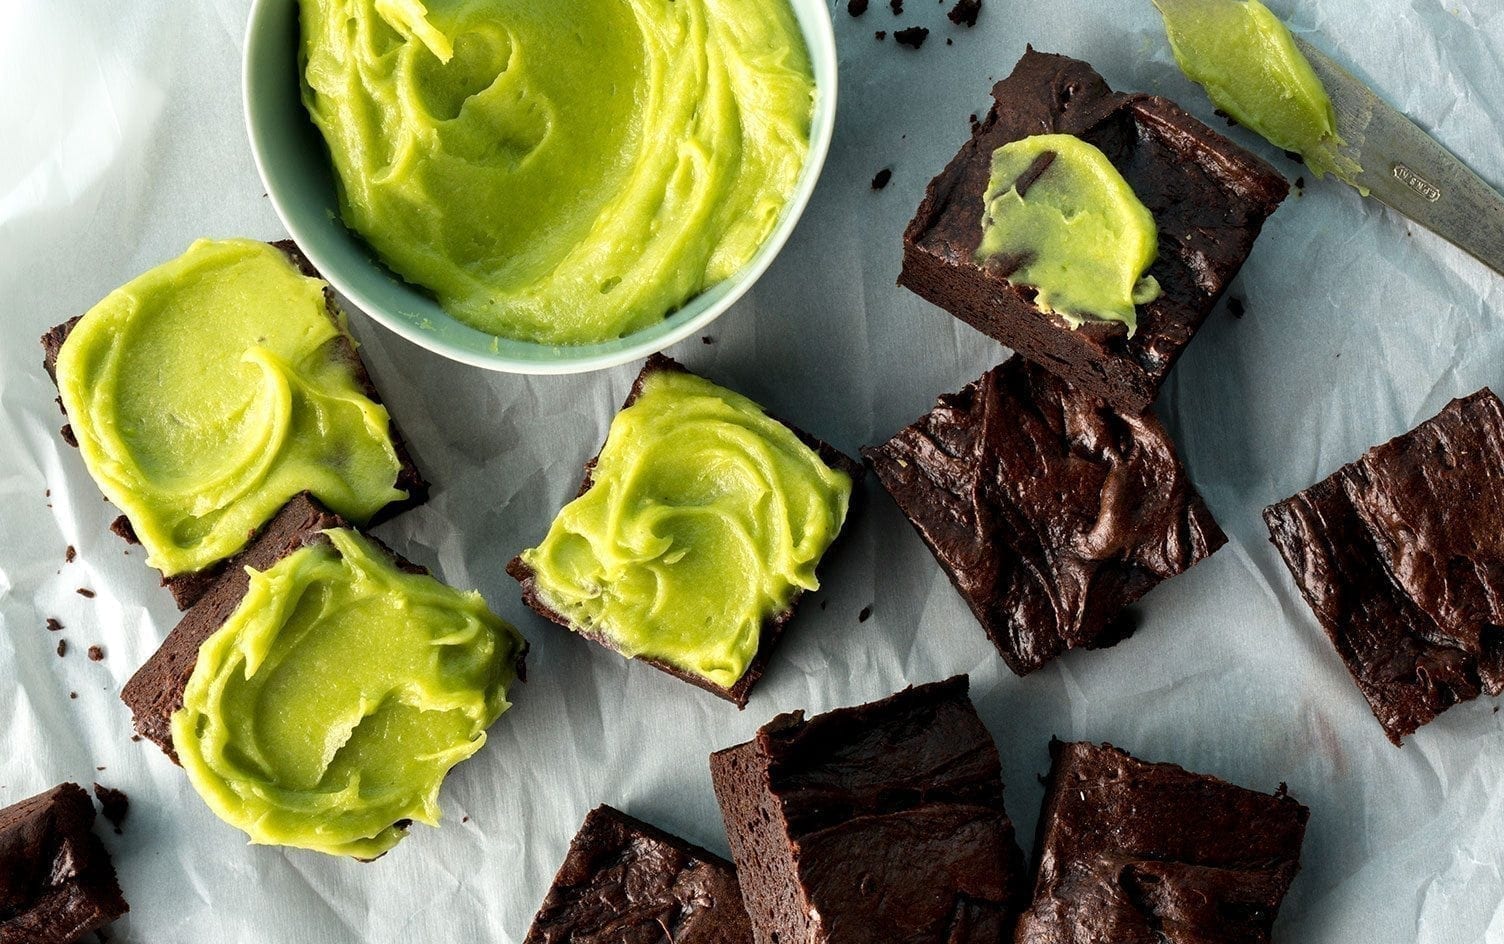 It’s easier to cut back on the processed candy when you have equally delicious, but healthier options. These treats, each under 200 calories, offer a lower-sugar alternative to packaged, processed candy. From brownies to mock candy bars, these recipes are worth the splurge. AVOCADO BROWNIES WITH AVOCADO FROSTING | MYFITNESSPAL’S RECIPES Nutrition (per serving): Calories: 196; Total Fat: 9g; Saturated Fat: 2g; Monounsaturated Fat: 2g; Polyunsaturated Fat: 1g; Cholesterol: 23mg; Sodium: 39mg; Carbohydrate: 27g; Dietary Fiber: 1g; Sugar: 21g; Protein: 2g CHOCOLATE PEANUT BUTTER BITES | AMANDA DROZDZ Nutrition (per serving): Calories: 123; Total Fat: 8g; Saturated Fat: 2g; Monounsaturated Fat: 3g; Cholesterol: 0mg; Sodium: 0mg; Carbohydrate: 13g; Dietary Fiber: 2g; Sugar: 7g; Protein: 4g PUMPKIN-SPICED APPLE CHIPS | MYFITNESSPAL’S FEATURED RECIPES Nutrition (per serving): Calories: 104; Total Fat: 0g; Saturated Fat: 0g; Monounsaturated Fat:0 g; Cholesterol: 0mg; Sodium: 5mg; Carbohydrate: 28g; Dietary Fiber: 9g; Sugar: 17g; Protein: 0g 5-INGREDIENT CHOCOLATE PEANUT BUTTER CUPS | MYFITNESSPAL’S RECIPES Nutrition (per serving): Calories: 169; Total Fat: 13g; Saturated Fat: 6g; Monounsaturated Fat: 0g; Cholesterol: 0mg; Sodium: 24mg; Carbohydrate: 9g; Dietary Fiber: 3g; Sugar: 7g; Protein: 4g PUMPKIN SPICE BUNDTLETTES WITH CHAI TEA GLAZE | MYFITNESSPAL’S RECIPES Nutrition (per serving): Calories: 180; Total Fat: 5g; Saturated Fat: 3g; Monounsaturated Fat: 1g; Cholesterol: 26mg; Sodium: 225mg; Carbohydrate: 34g; Dietary Fiber: 3g; Sugar: 19g; Protein: 3g APPLE CIDER MINI MUFFINS | MYFITNESSPAL’S RECIPES Nutrition (per serving): Calories: 98; Total Fat: 3g; Saturated Fat: 1.5g; Monounsaturated Fat: 1g; Cholesterol: 24mg; Sodium: 74mg; Carbohydrate: 18g; Dietary Fiber: 1g; Sugar: 15g; Protein: 2g NO-BAKE PUMPKIN CHEESECAKE | GINA HOMOLKA Nutrition (per serving): Calories: 187; Total Fat: 10g; Saturated Fat: 3g; Monounsaturated Fat: 1g; Cholesterol: 5.5mg; Sodium: 178mg; Carbohydrate: 21g; Dietary Fiber: 1.5g; Sugar: 13g; Protein: 2.5g Originally published October 2017, updated October 2023 Ready to take the next step? Unlock MyFitnessPal Premium to access custom goal settings, quick-log recipes, and guided plans from a registered dietitian. Premium users are 65% more likely to reach their weight loss goals!